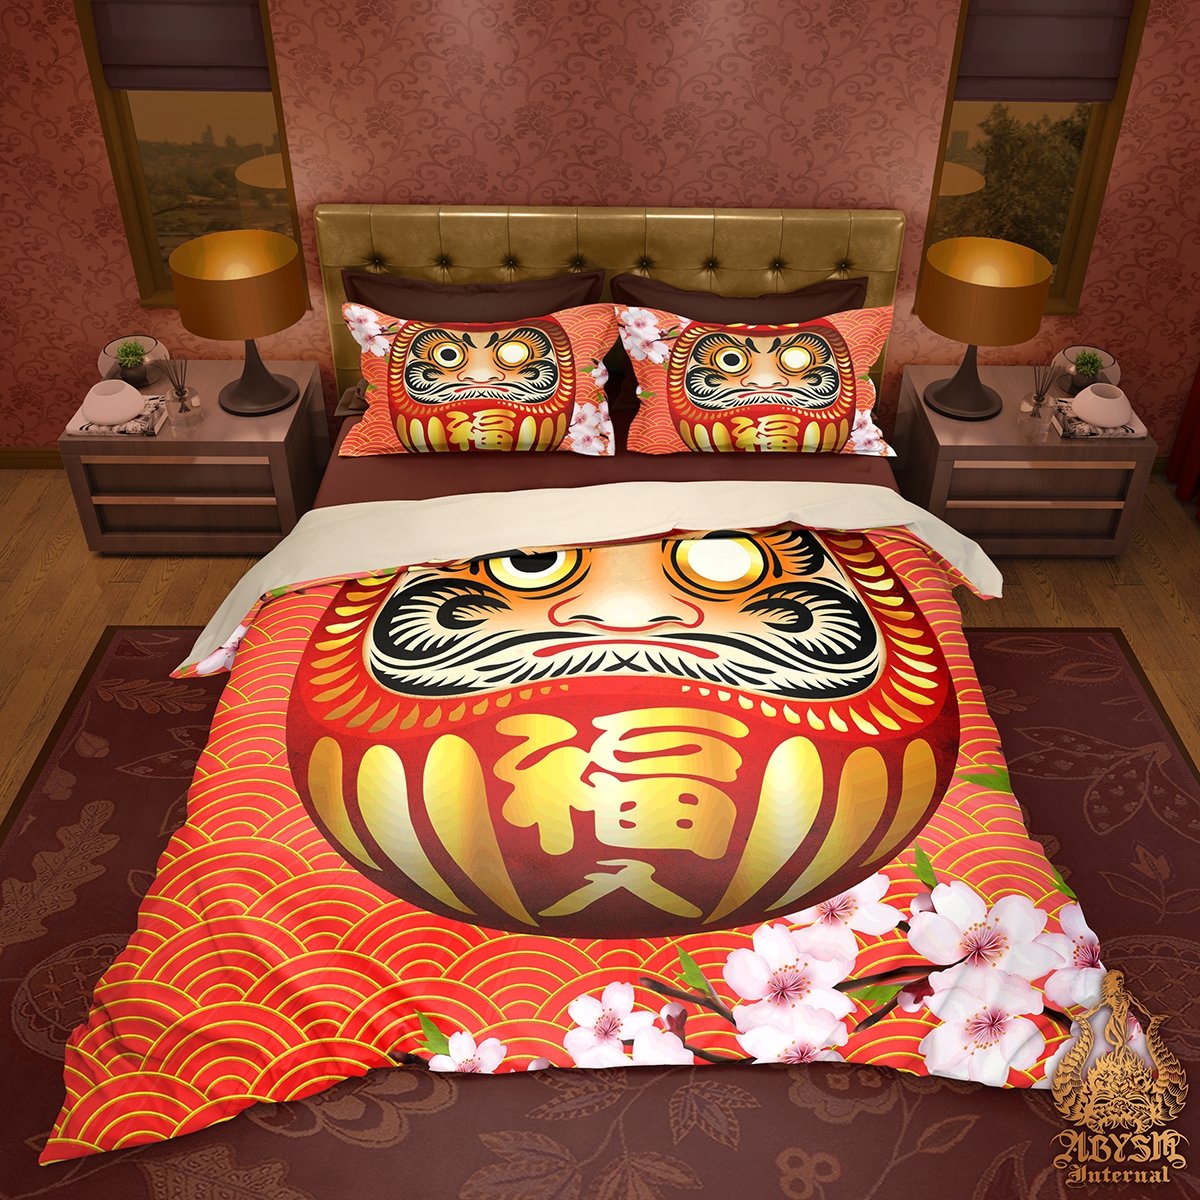 https://cdn.shopify.com/s/files/1/0584/5608/0574/products/daruma-bedding-set-comforter-and-duvet-indie-bed-cover-and-bedroom-decor-king-queen-and-twin-size-redabysm-internal-534109.jpg?v=1686686642&width=2400